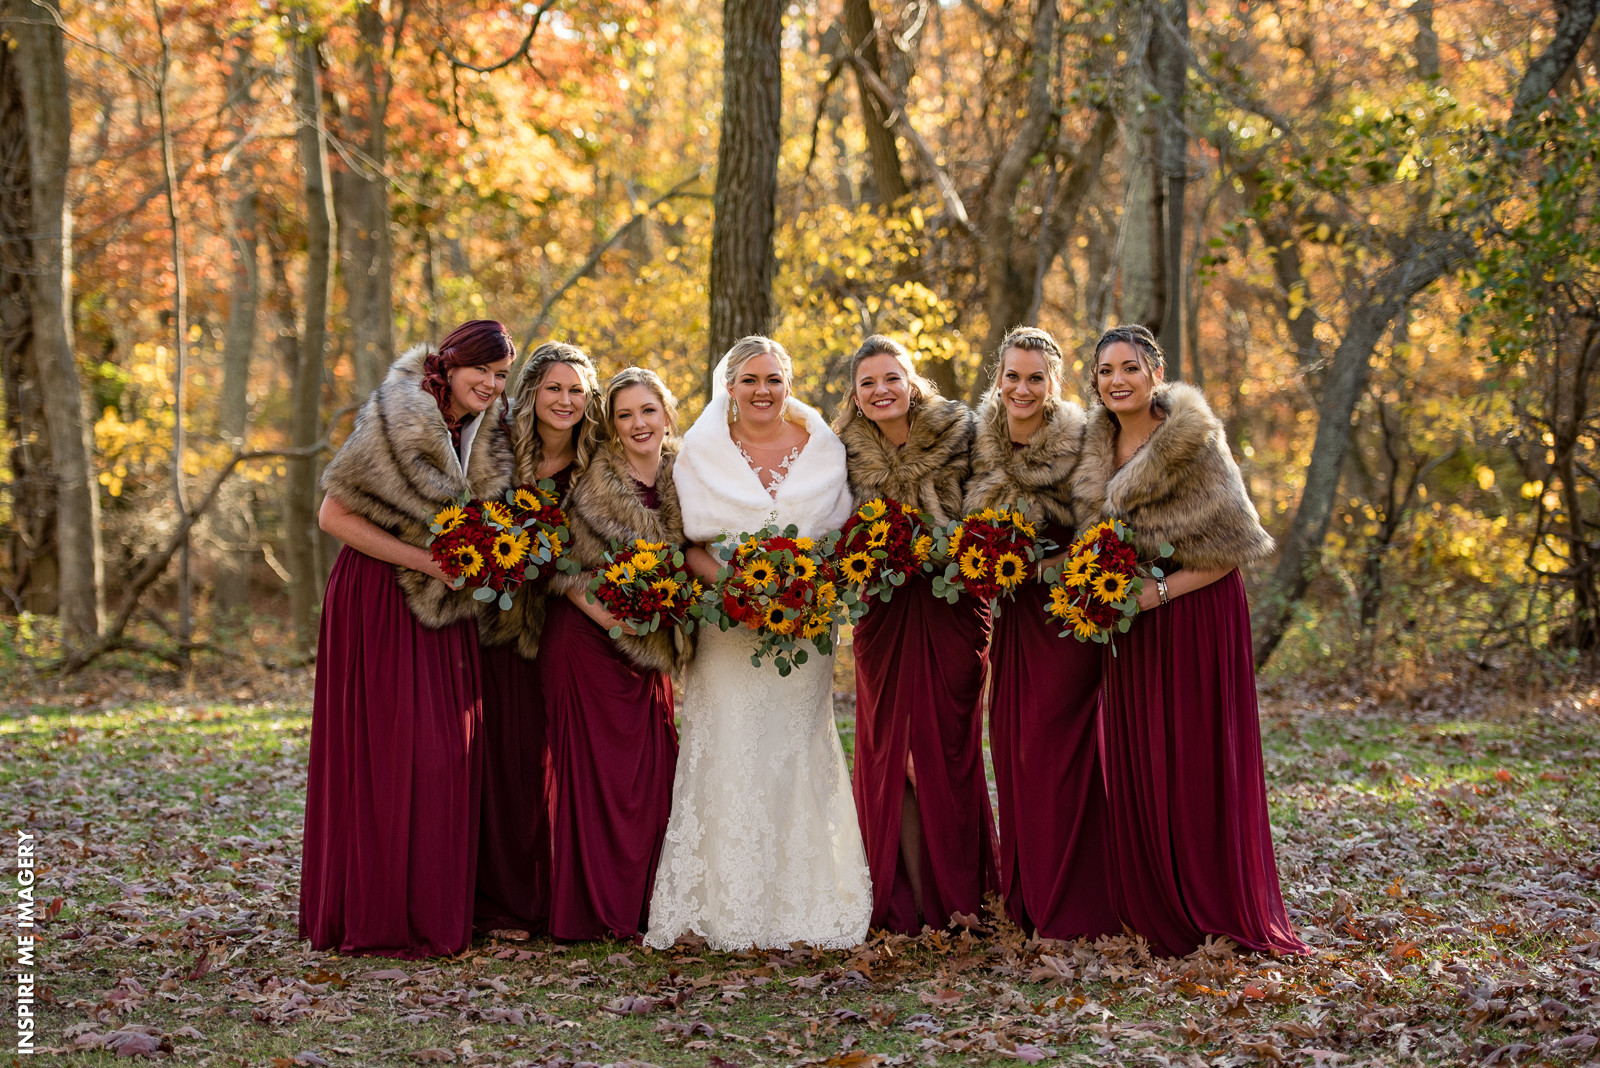 Colors For A Fall Wedding
 Color binations You’ll “Fall in Love” With for a Fall